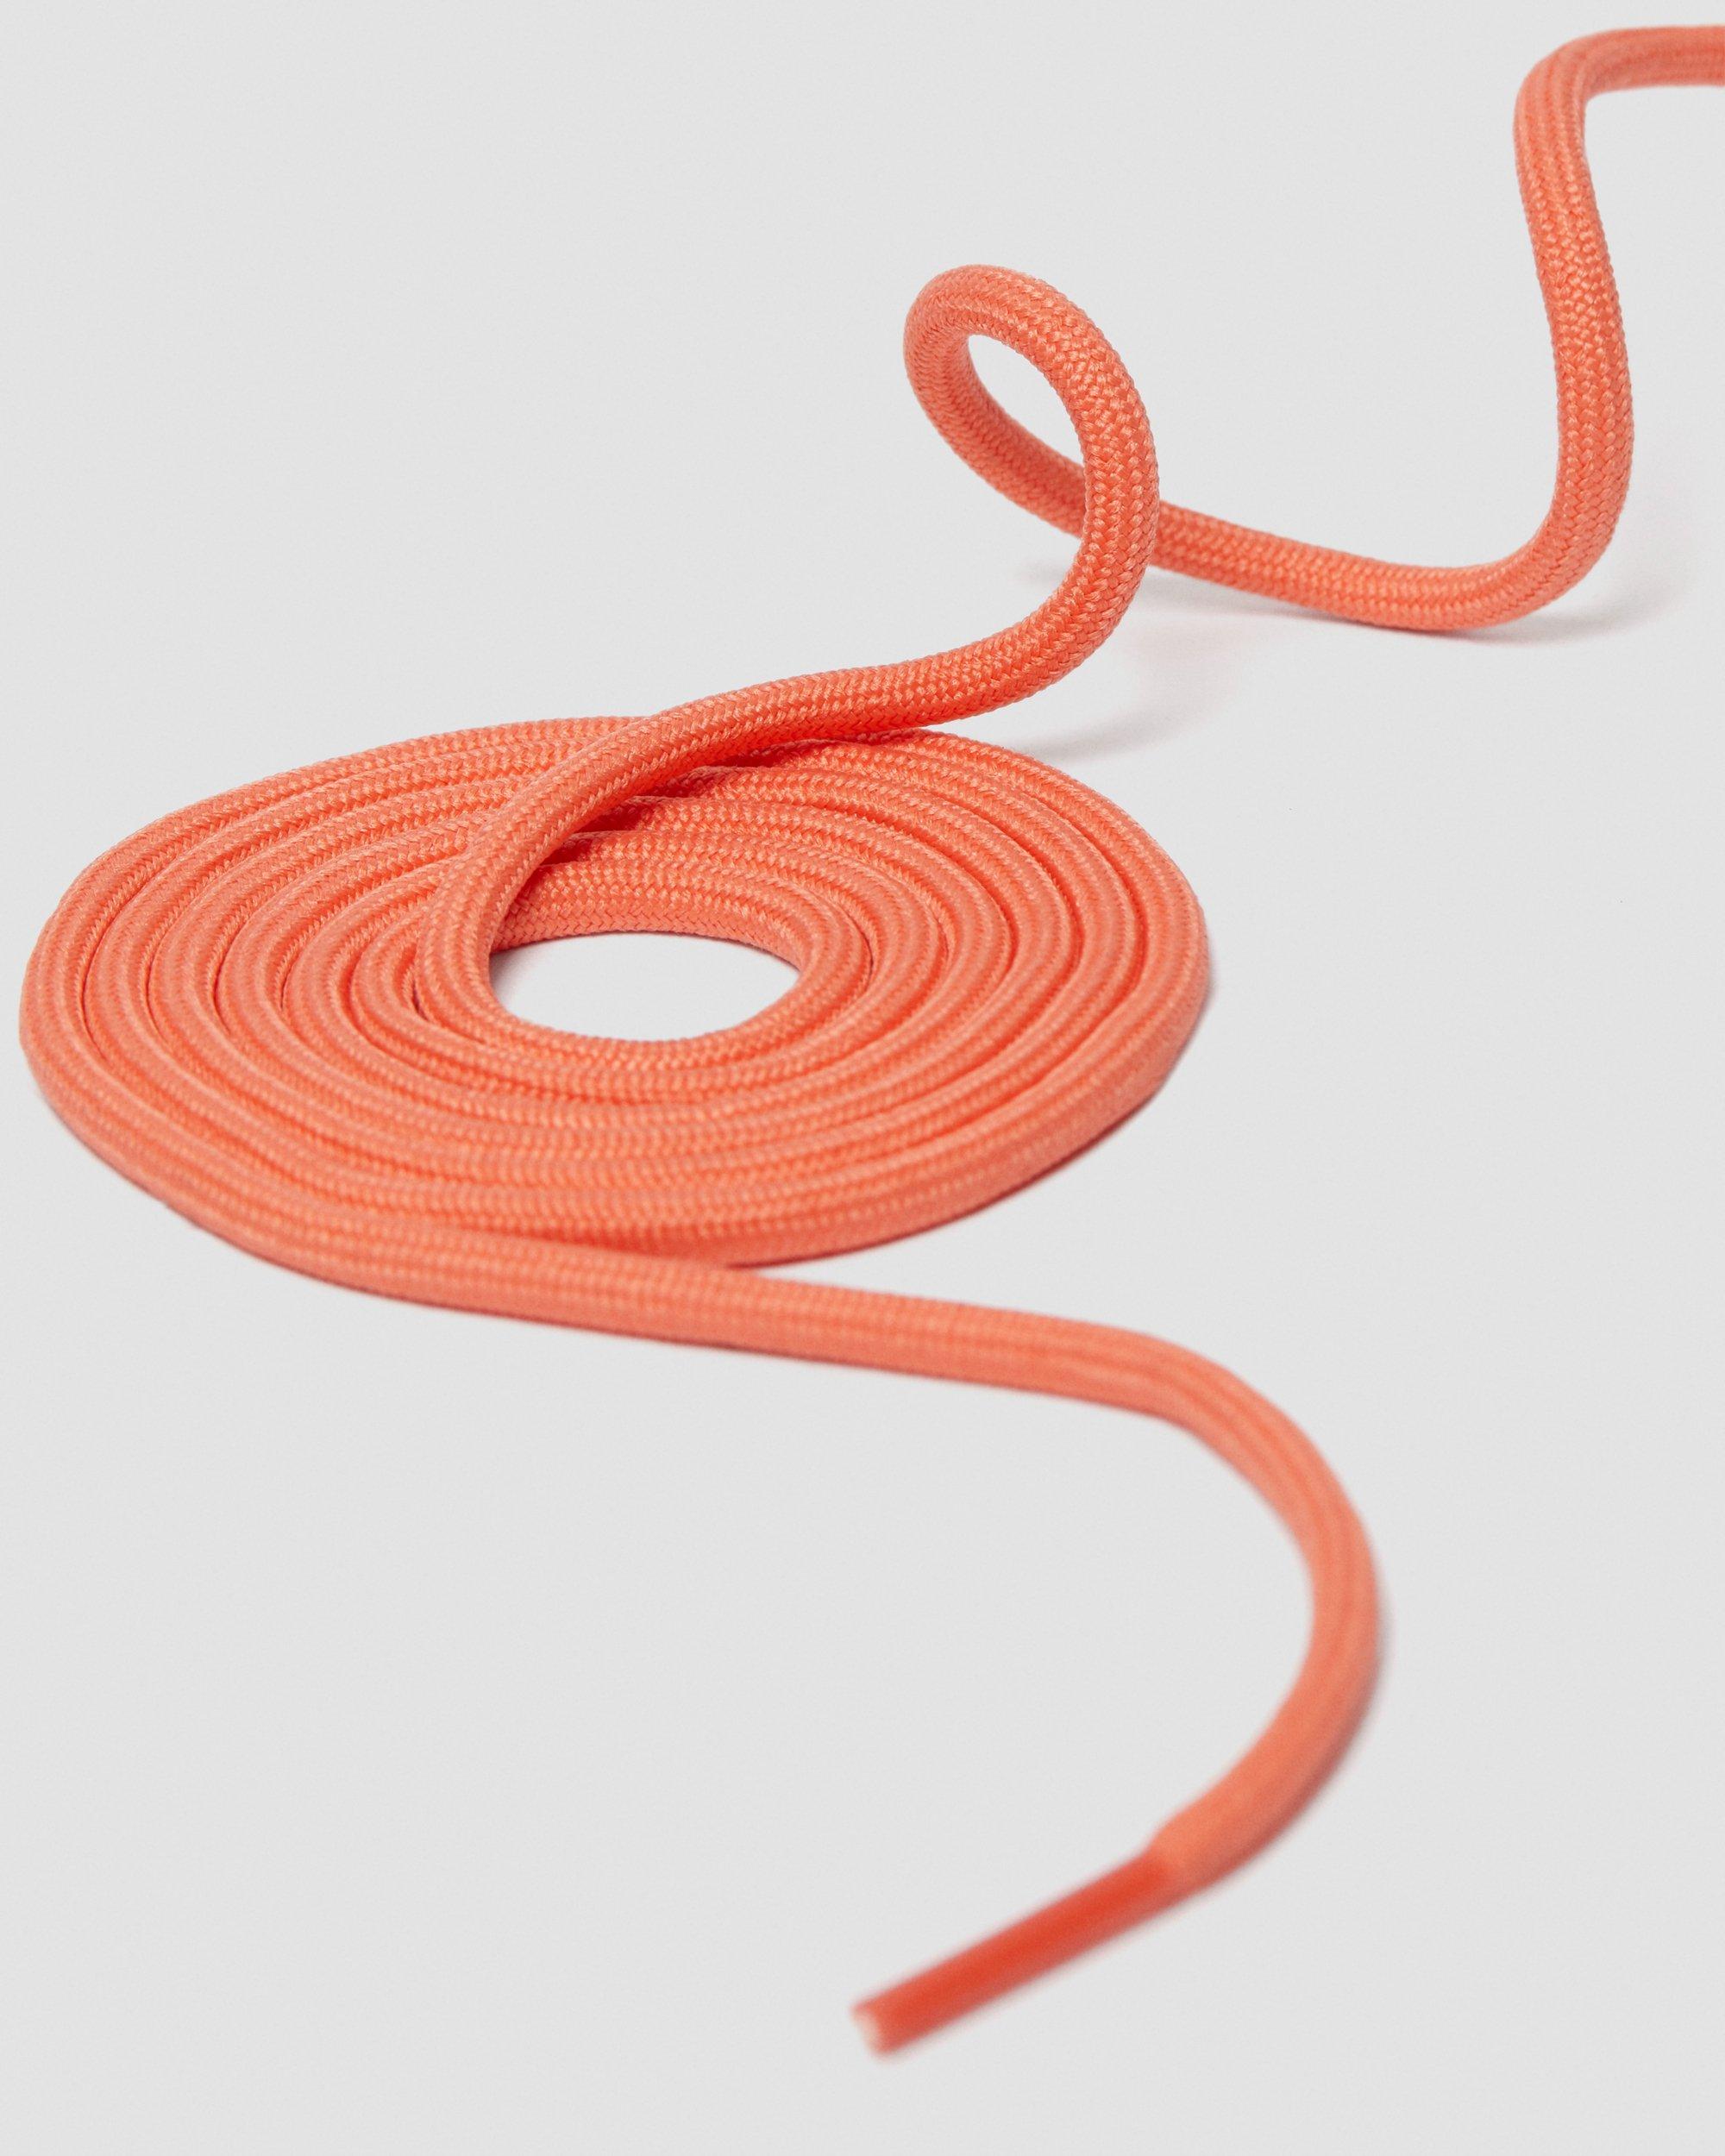 55 Inch Round Shoe Laces (8-10 Eye) in Salmon | Dr. Martens